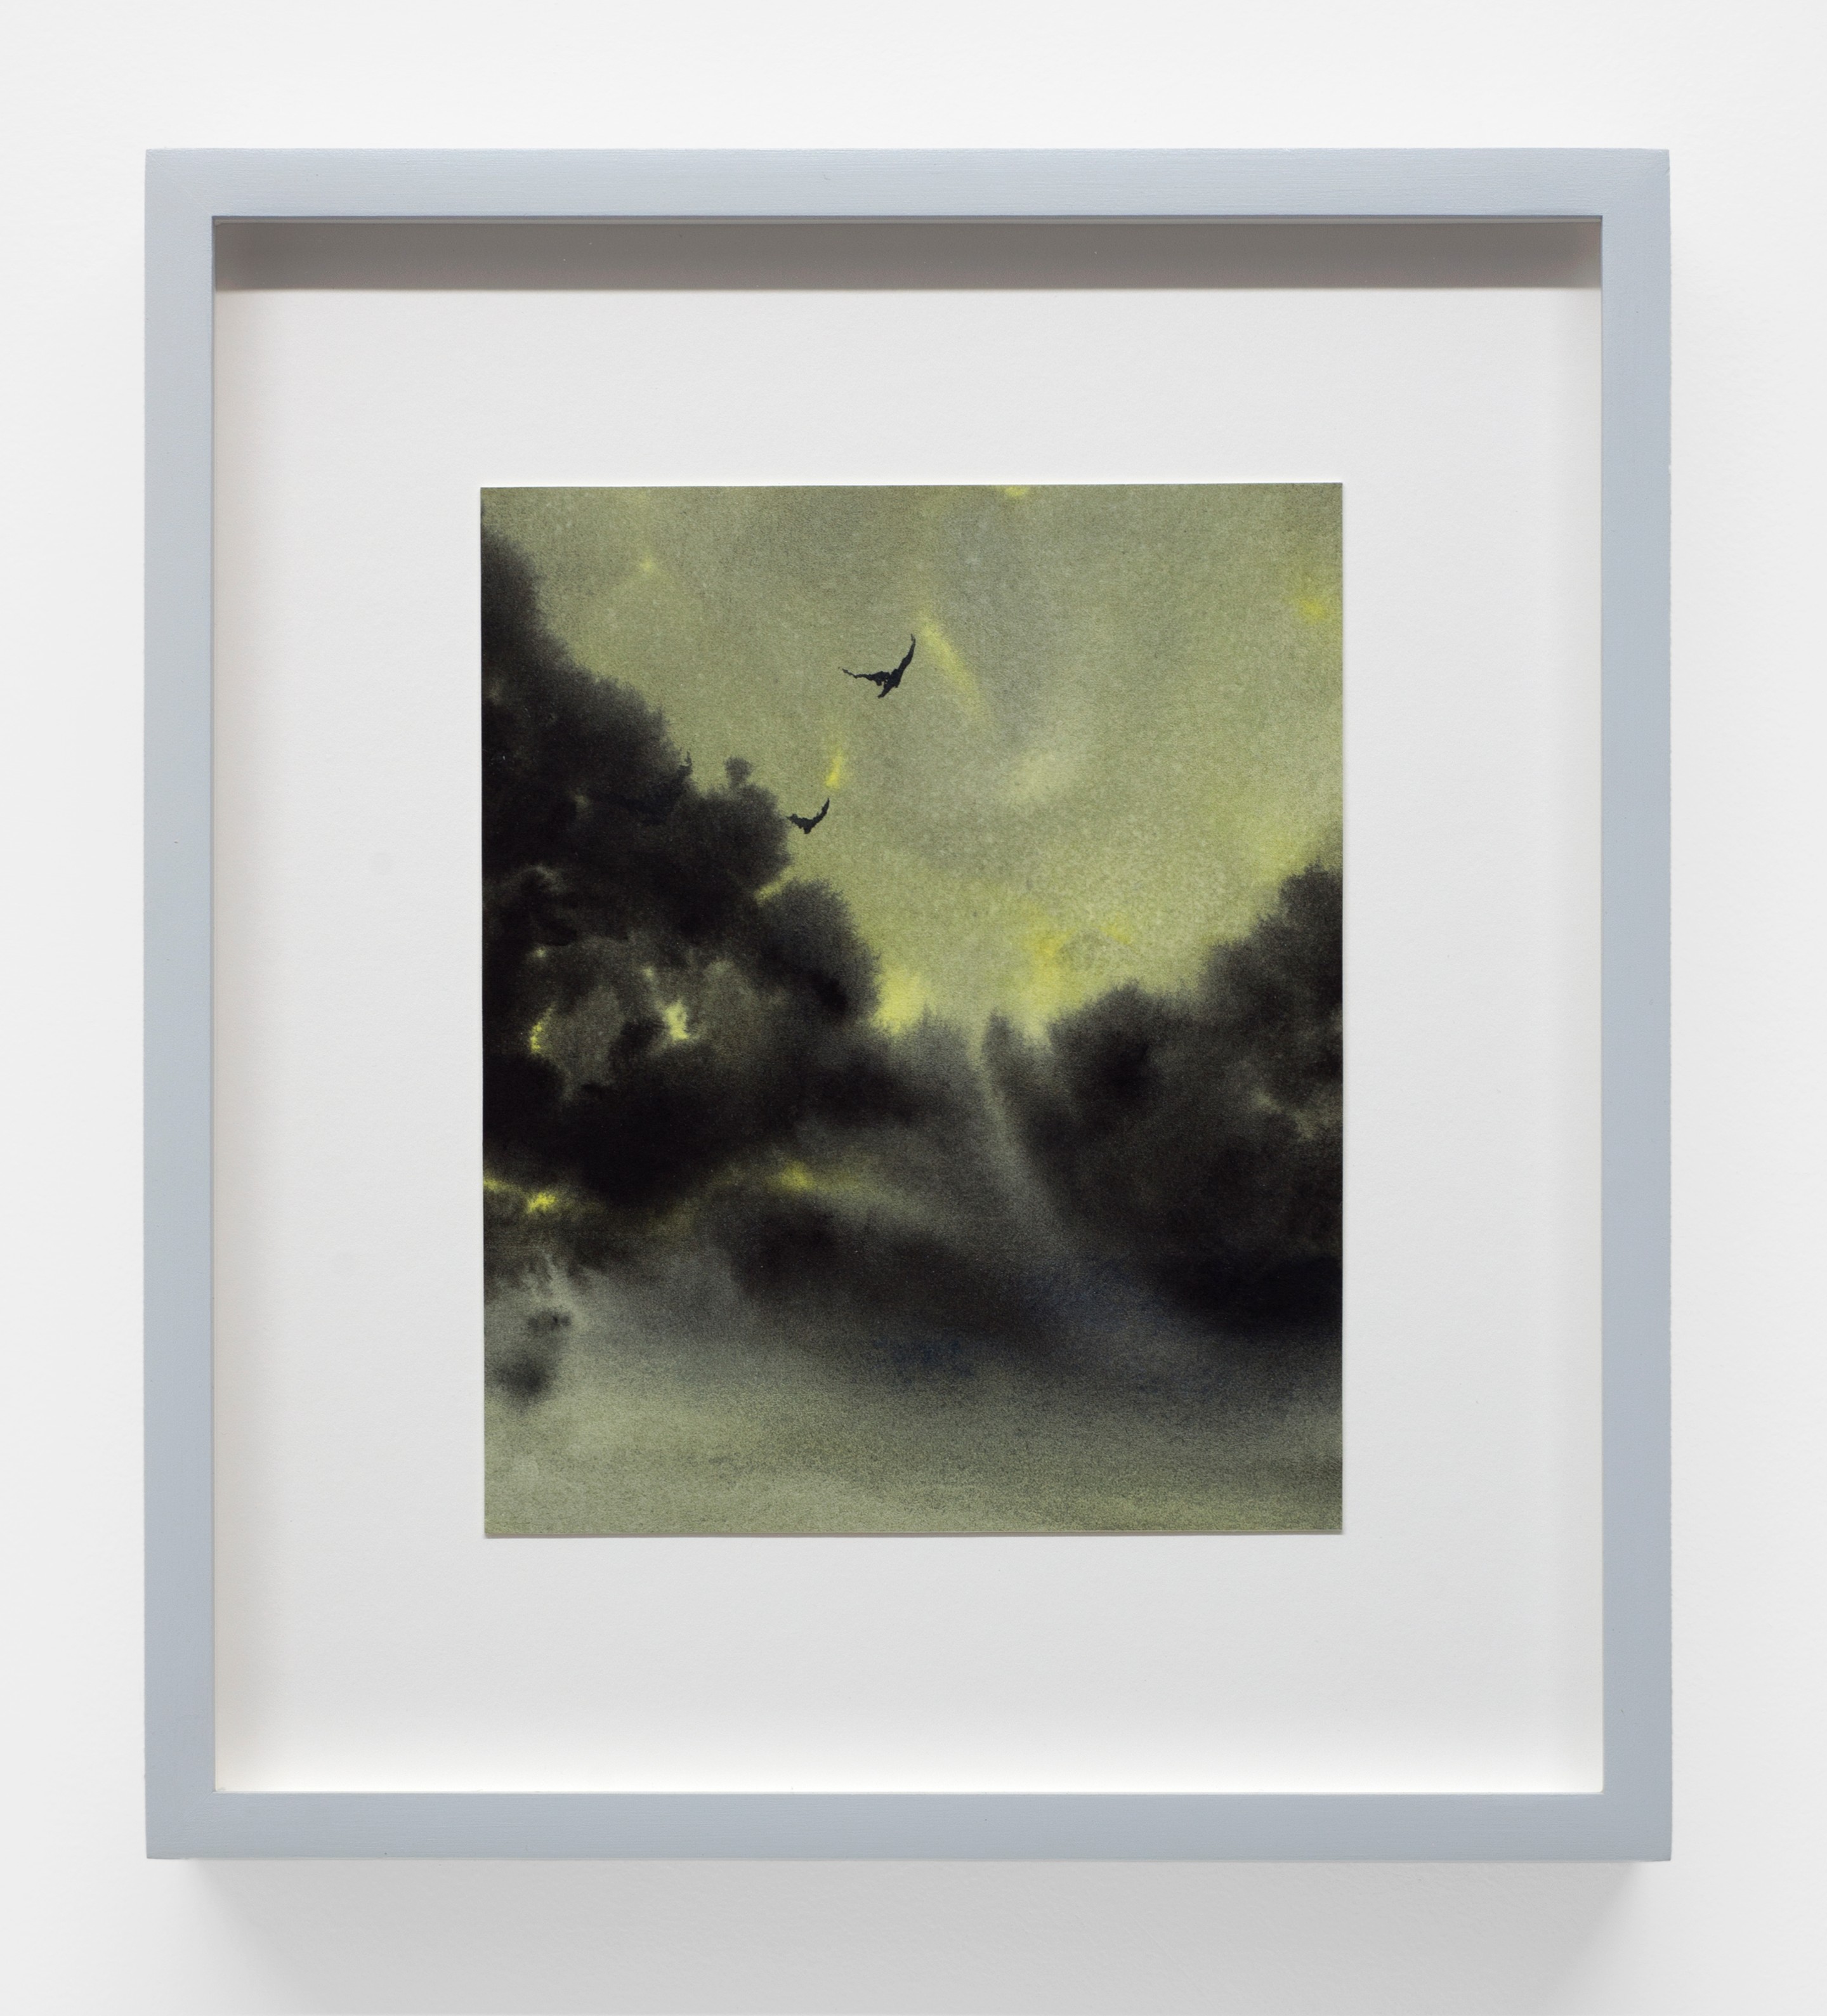 Untitled (2021)

Watercolor on paper

12.25h x 11w x 1.5d inches (31.12h x 27.94w x 3.81d cm) framed